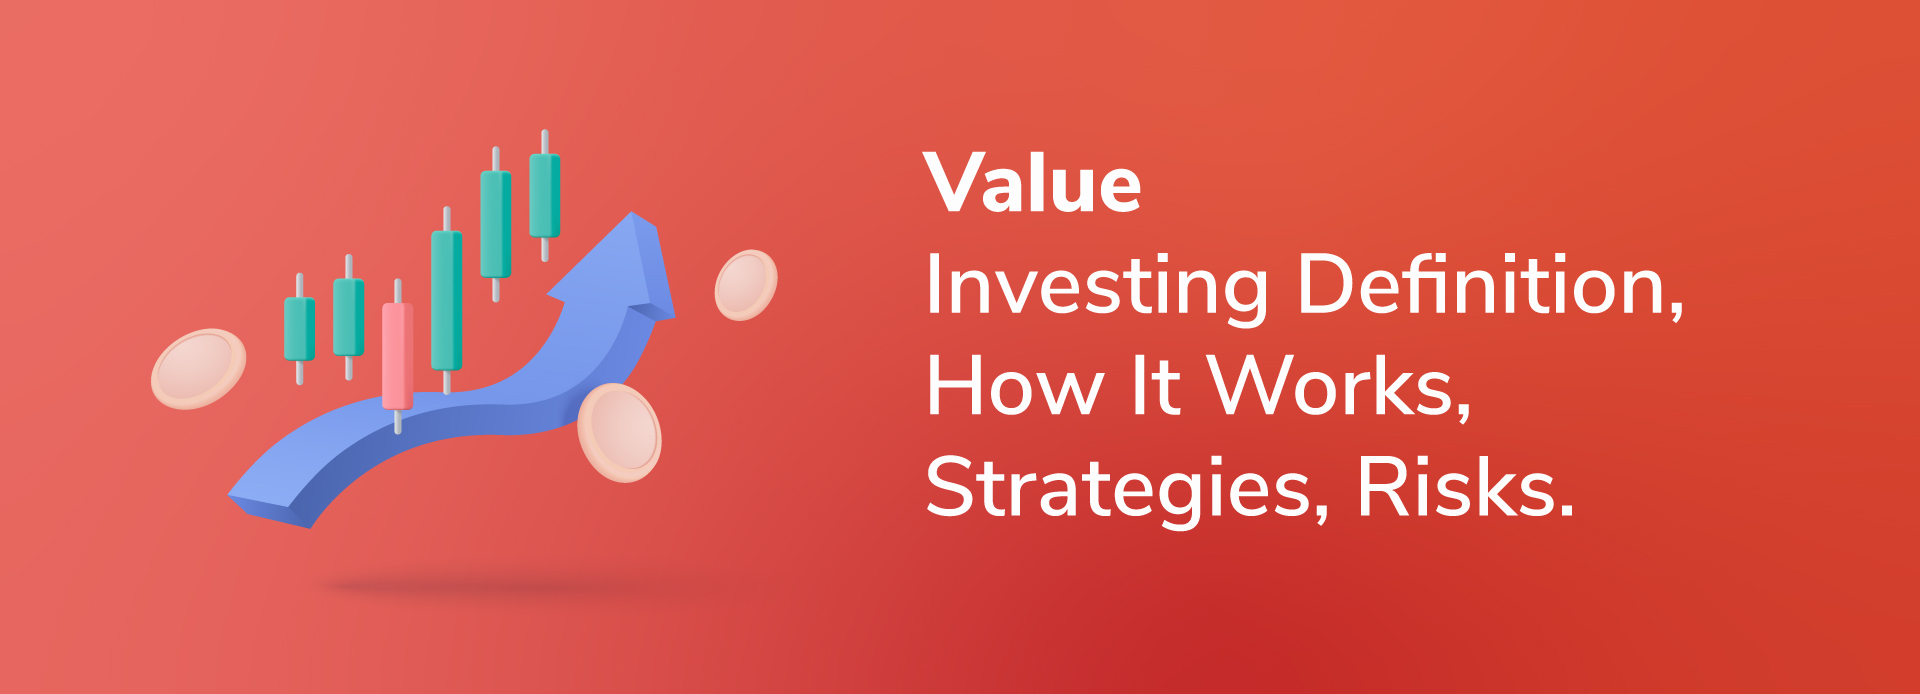 Value investing: Definition, how it works, strategies, and risks